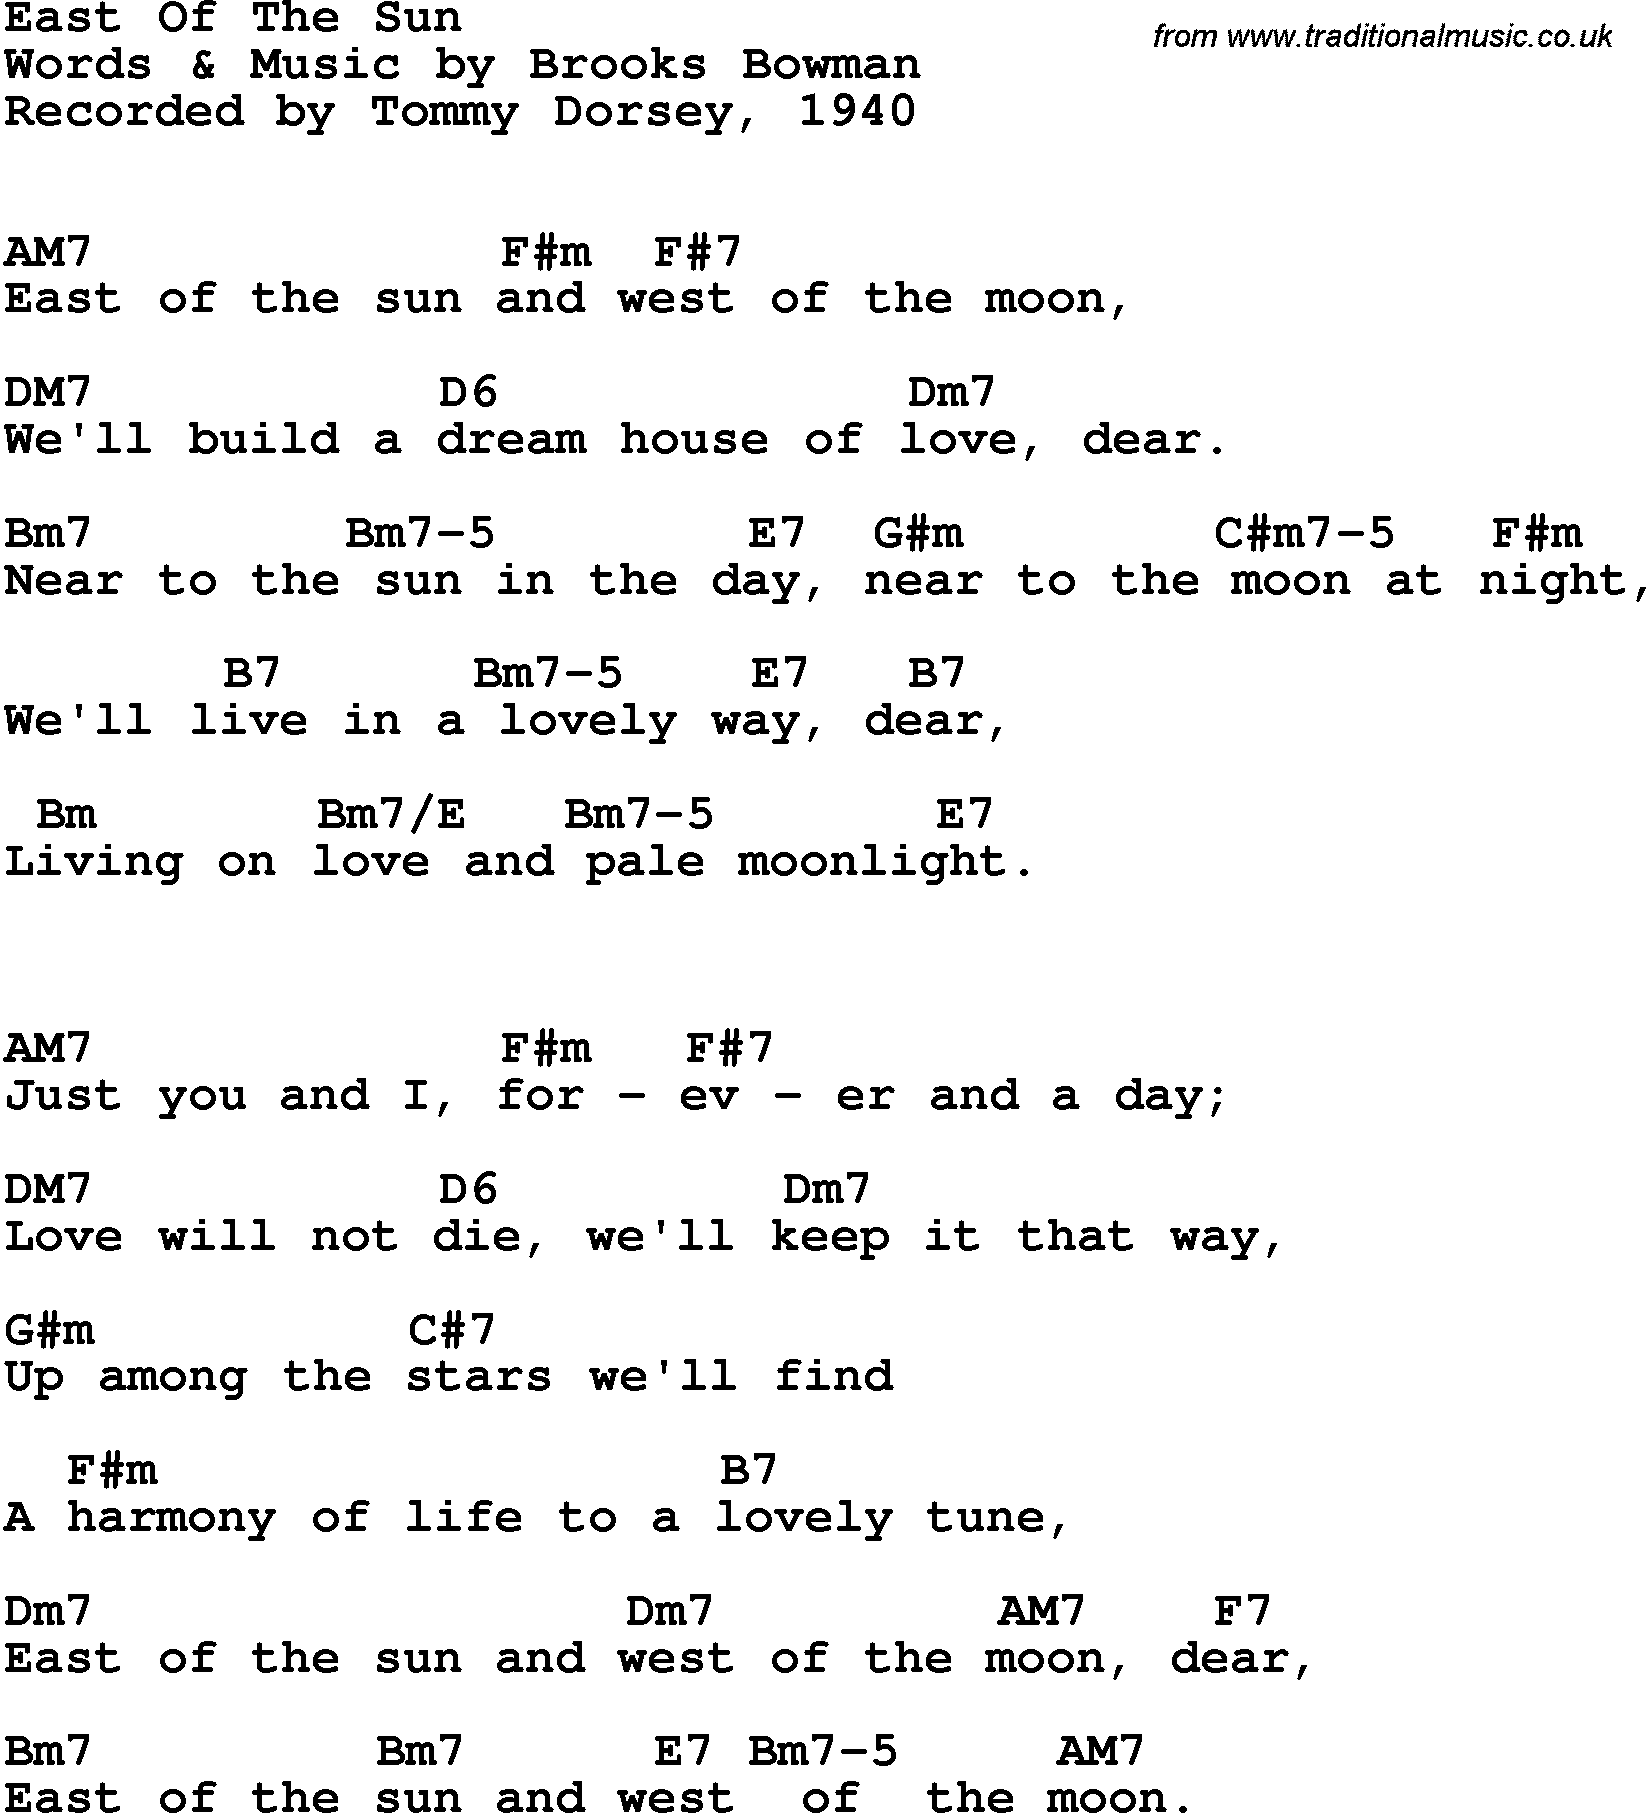 Song Lyrics with guitar chords for East Of The Sun - Tommy Dorsey, 1940